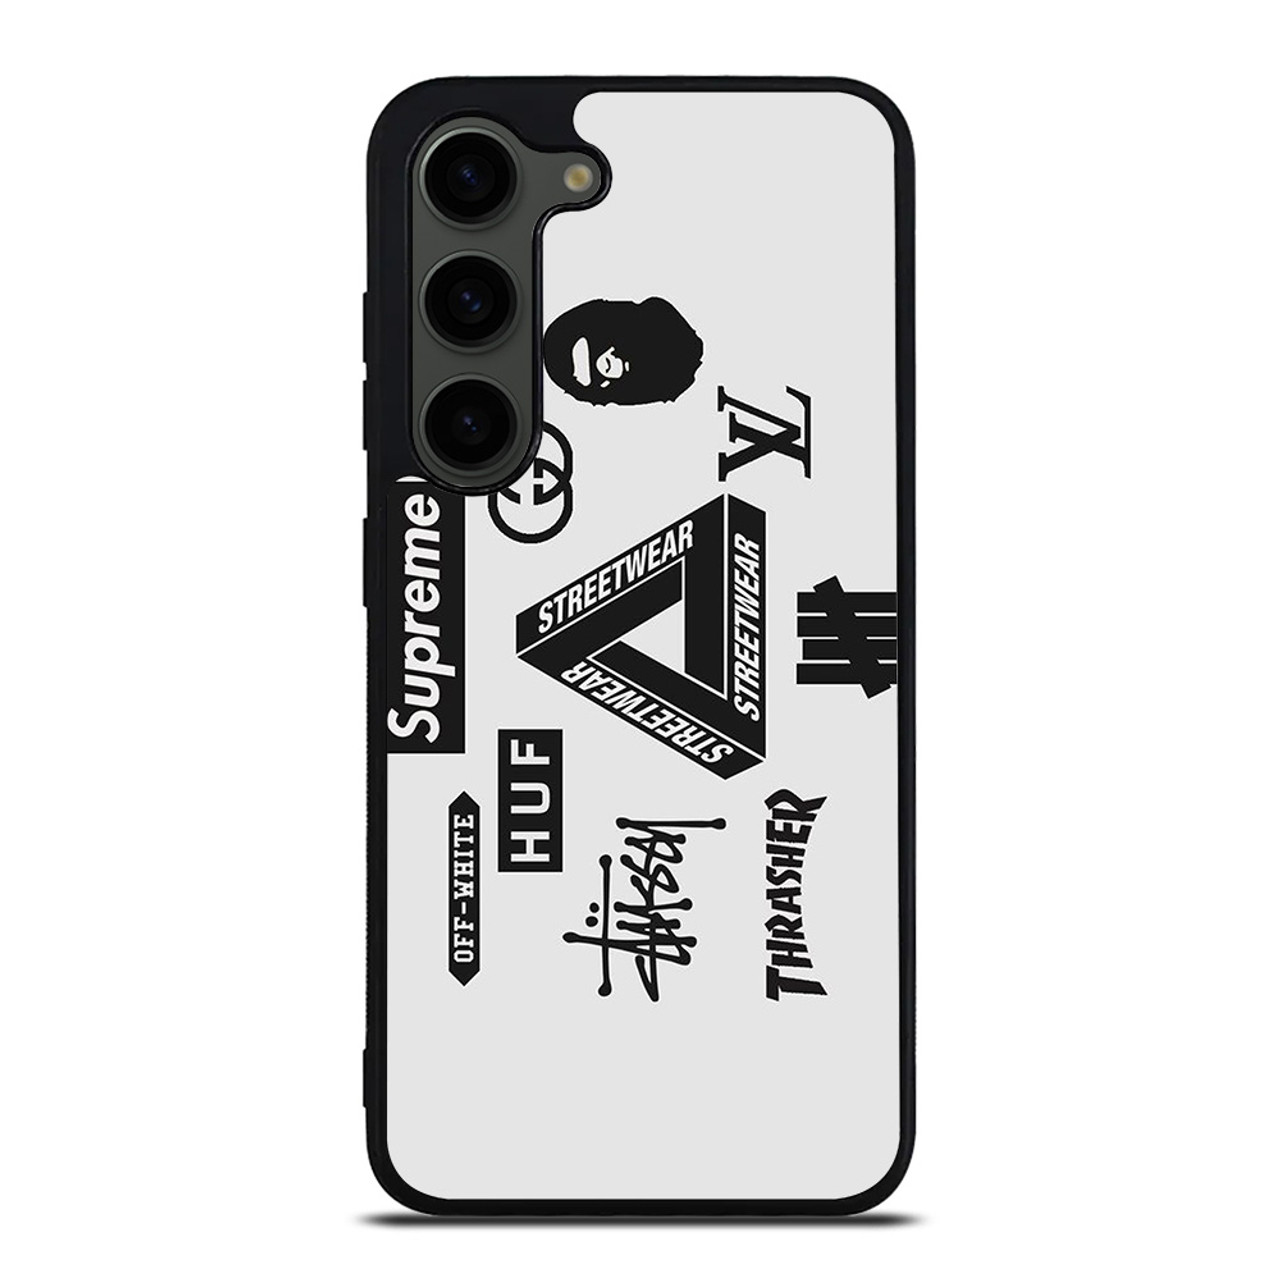 HYPEBEAST BRAND COLLAGE Samsung Galaxy S23 Ultra Case Cover